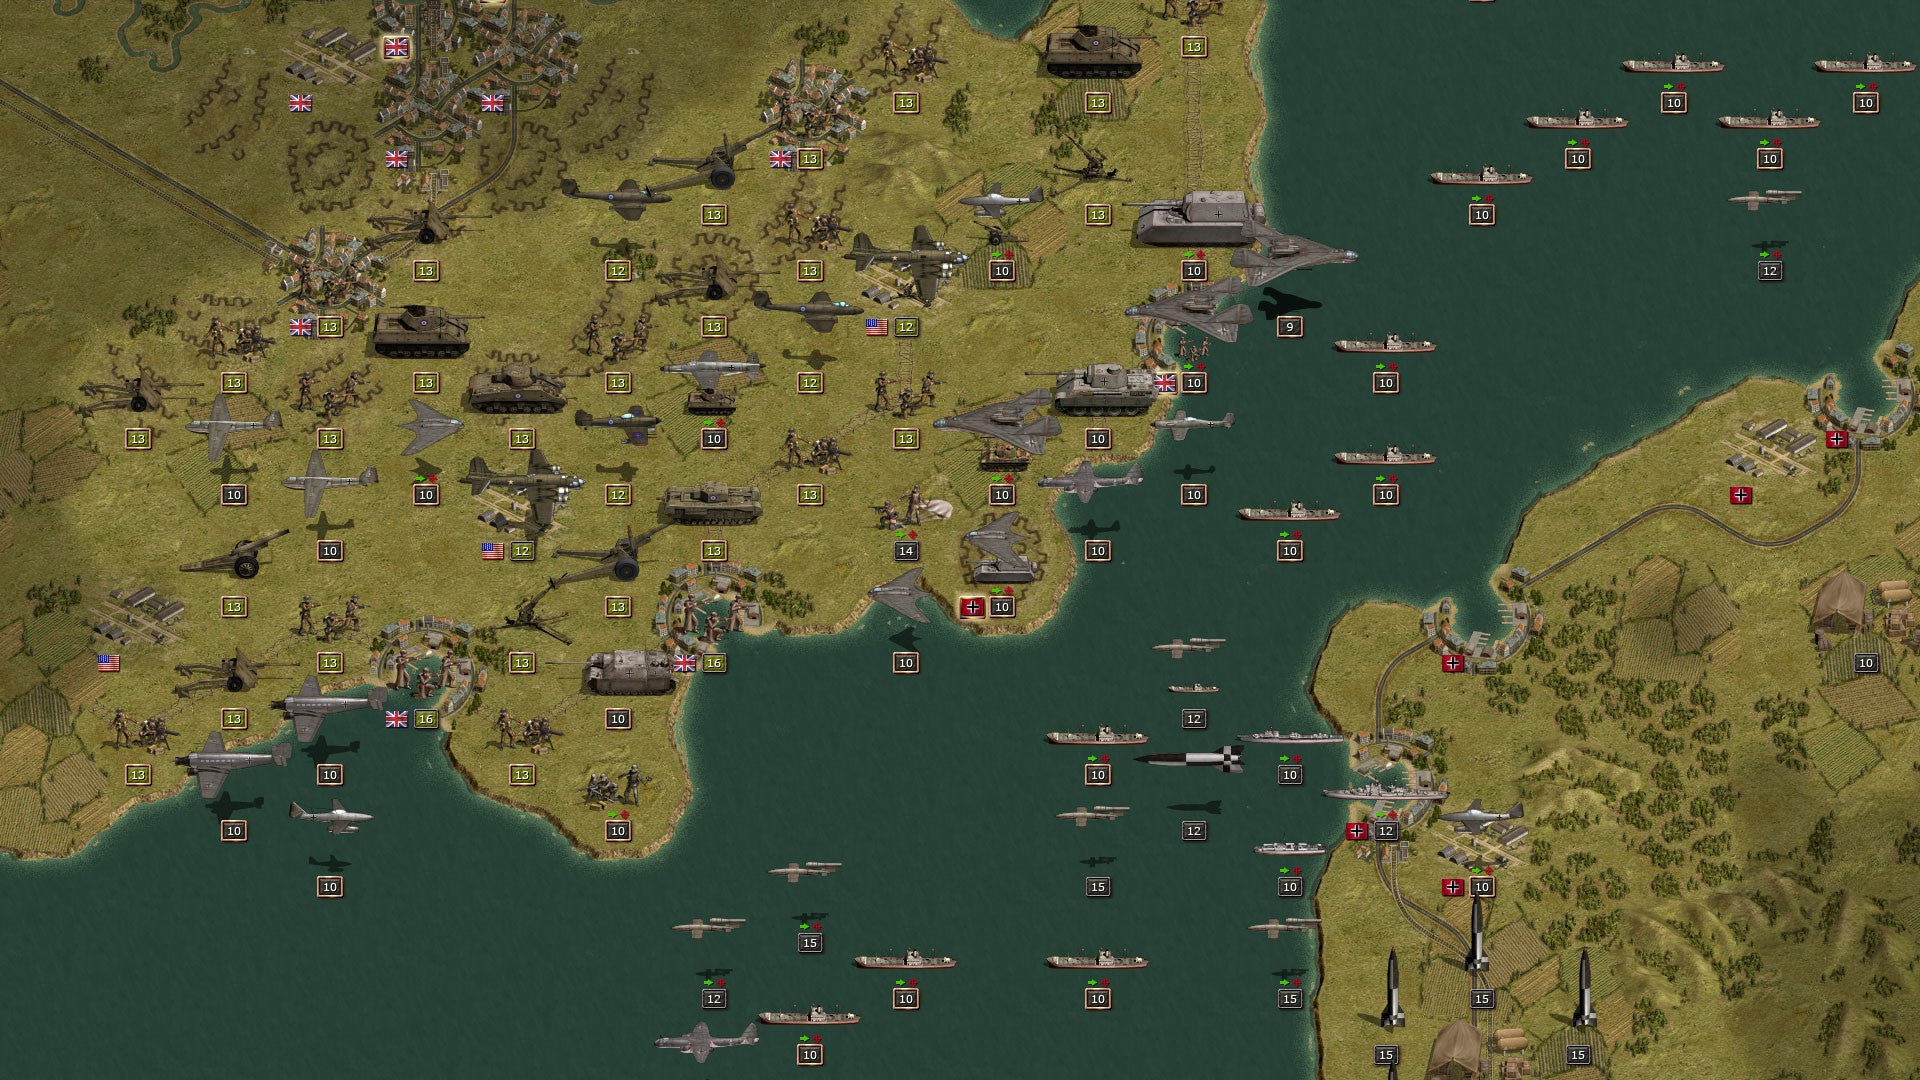 The expensive Panzer Corps strategy game for iOS gets a free Lite version